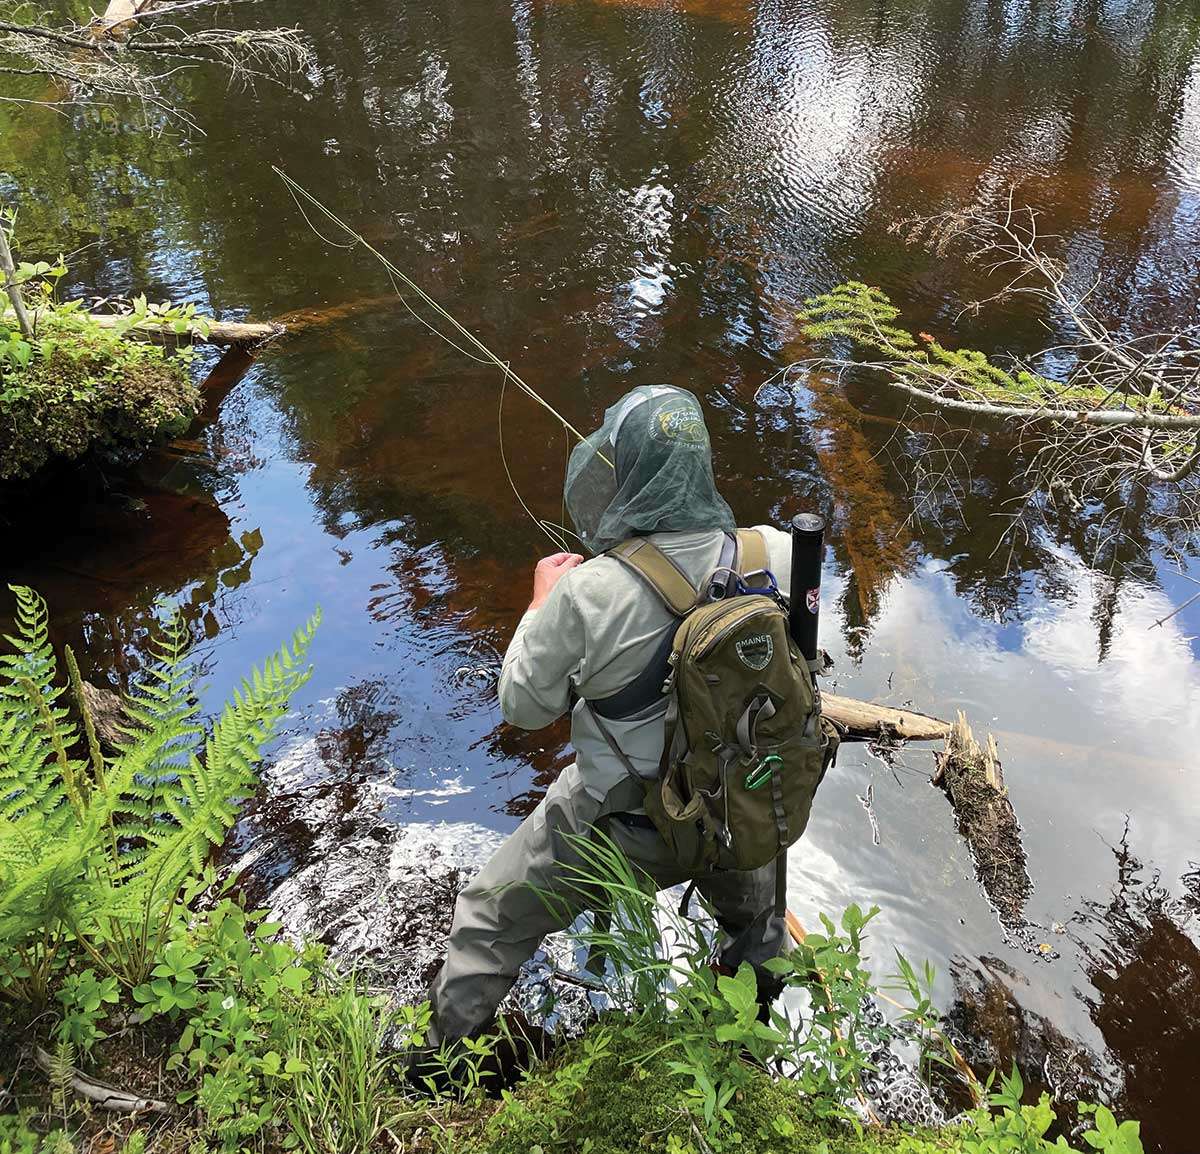 Trout tales: In search of native strains